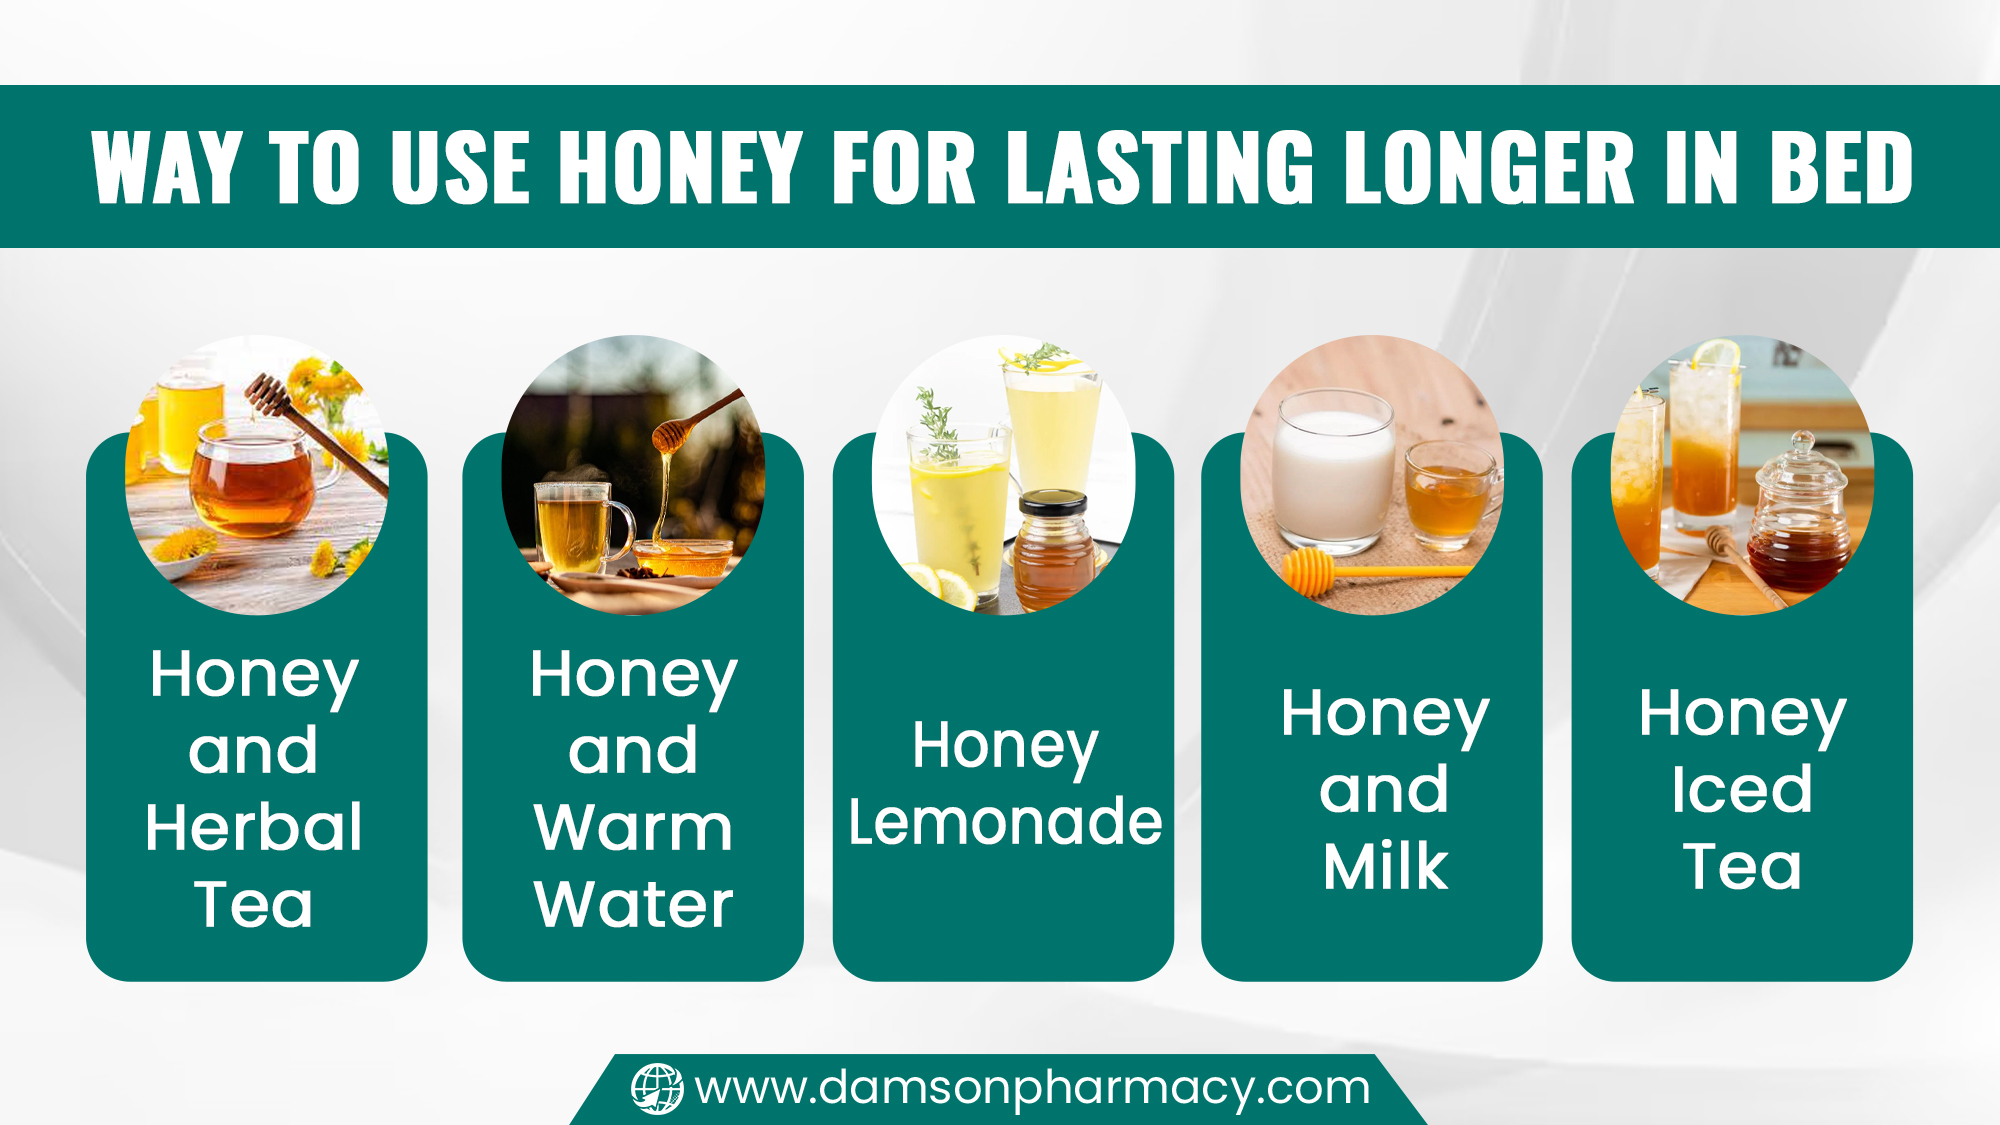 Way to Use Honey for Lasting Longer in Bed